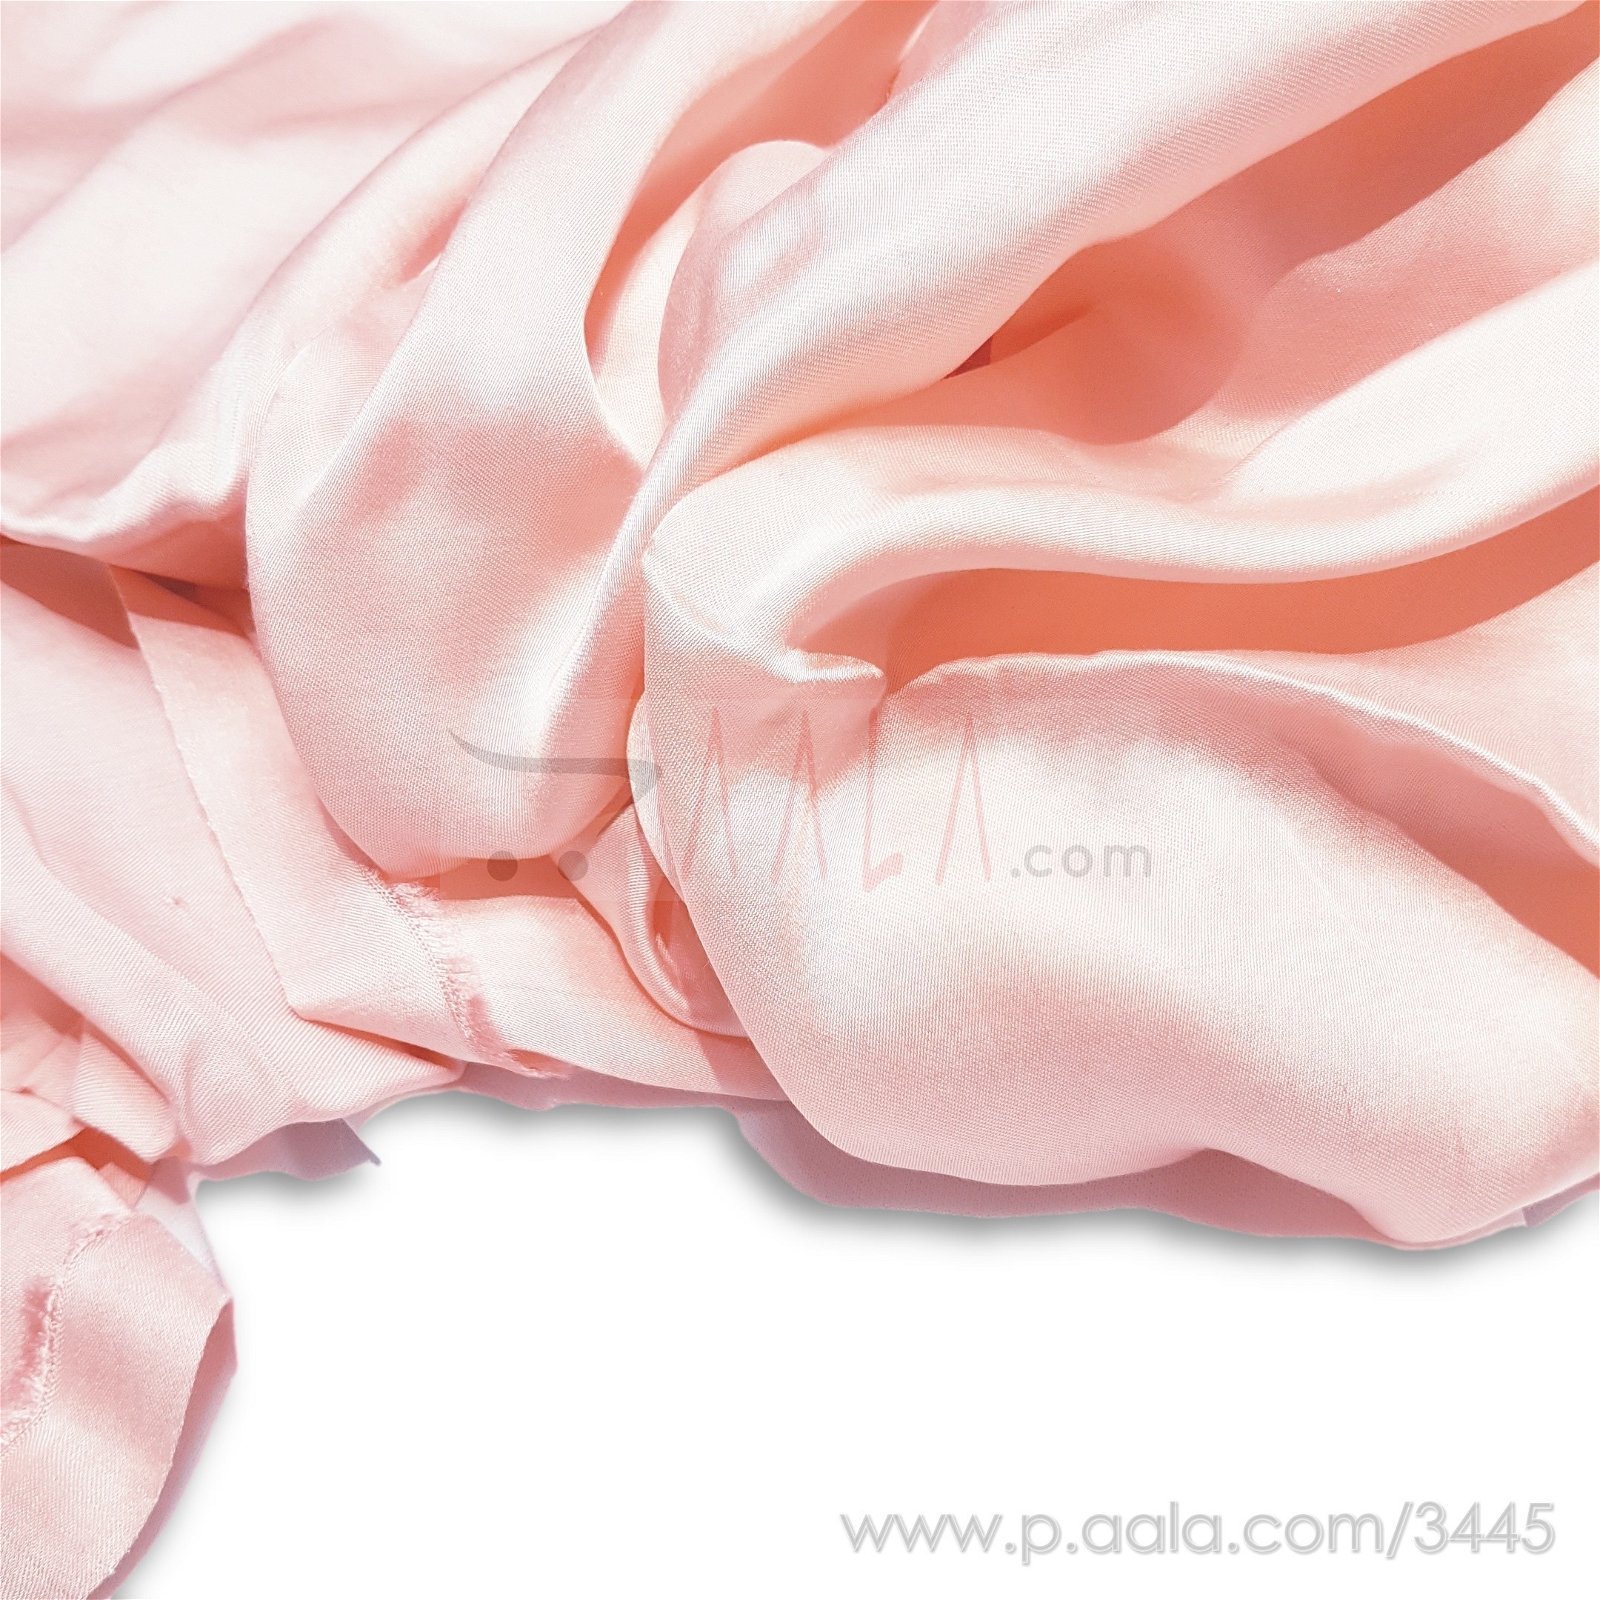 Modal Satin Viscose 44 Inches Dyed Per Metre #3445